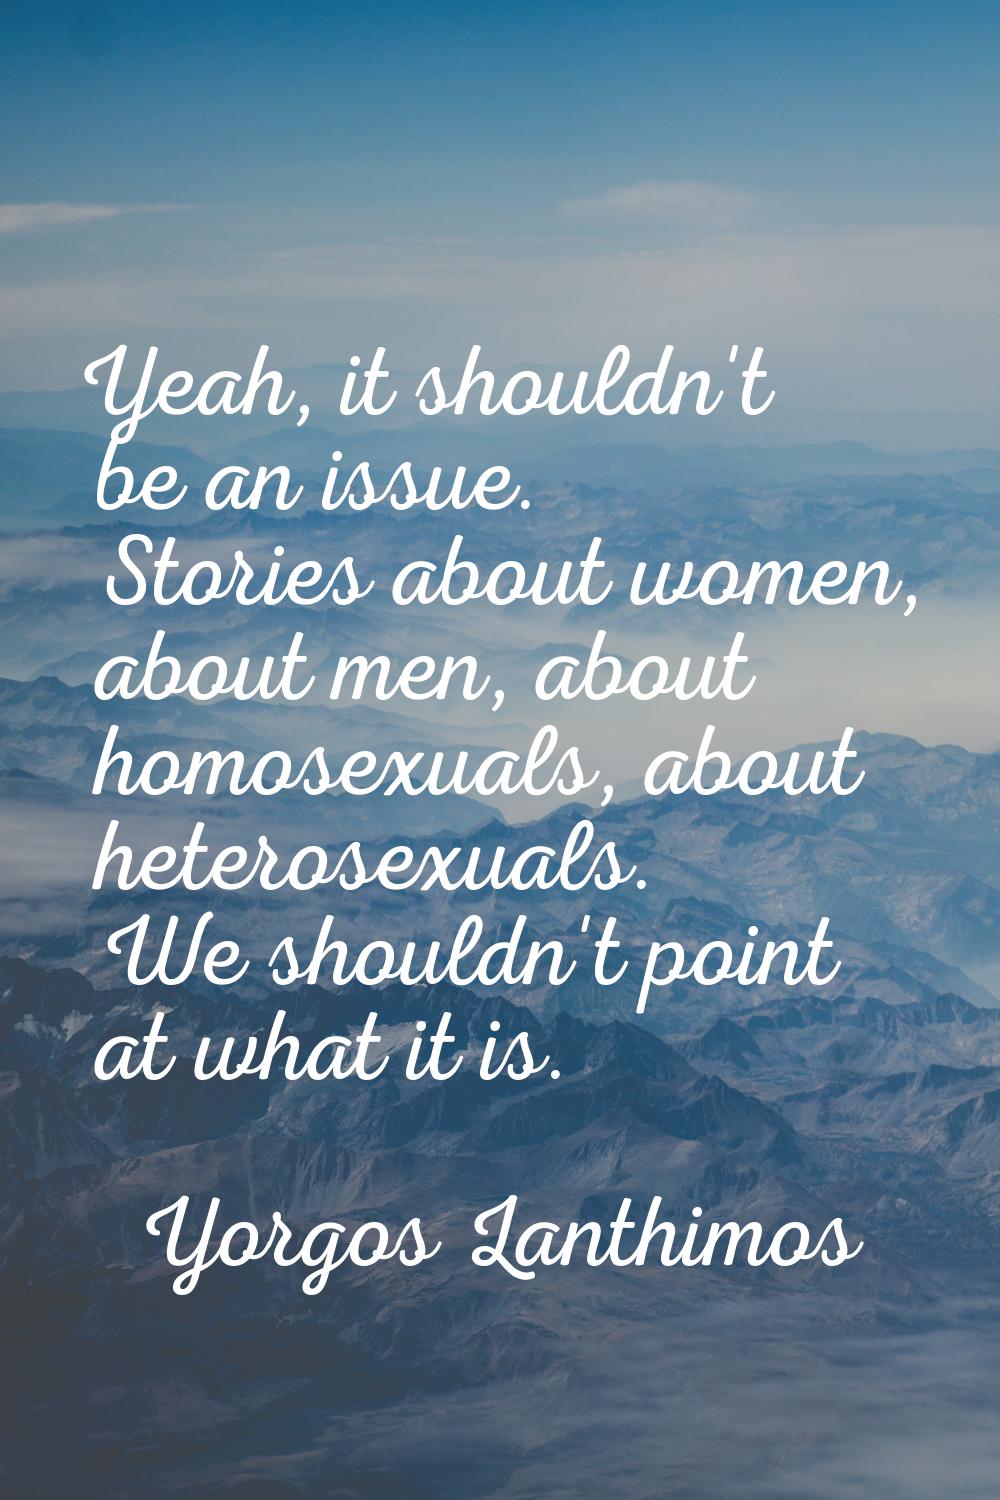 Yeah, it shouldn't be an issue. Stories about women, about men, about homosexuals, about heterosexu